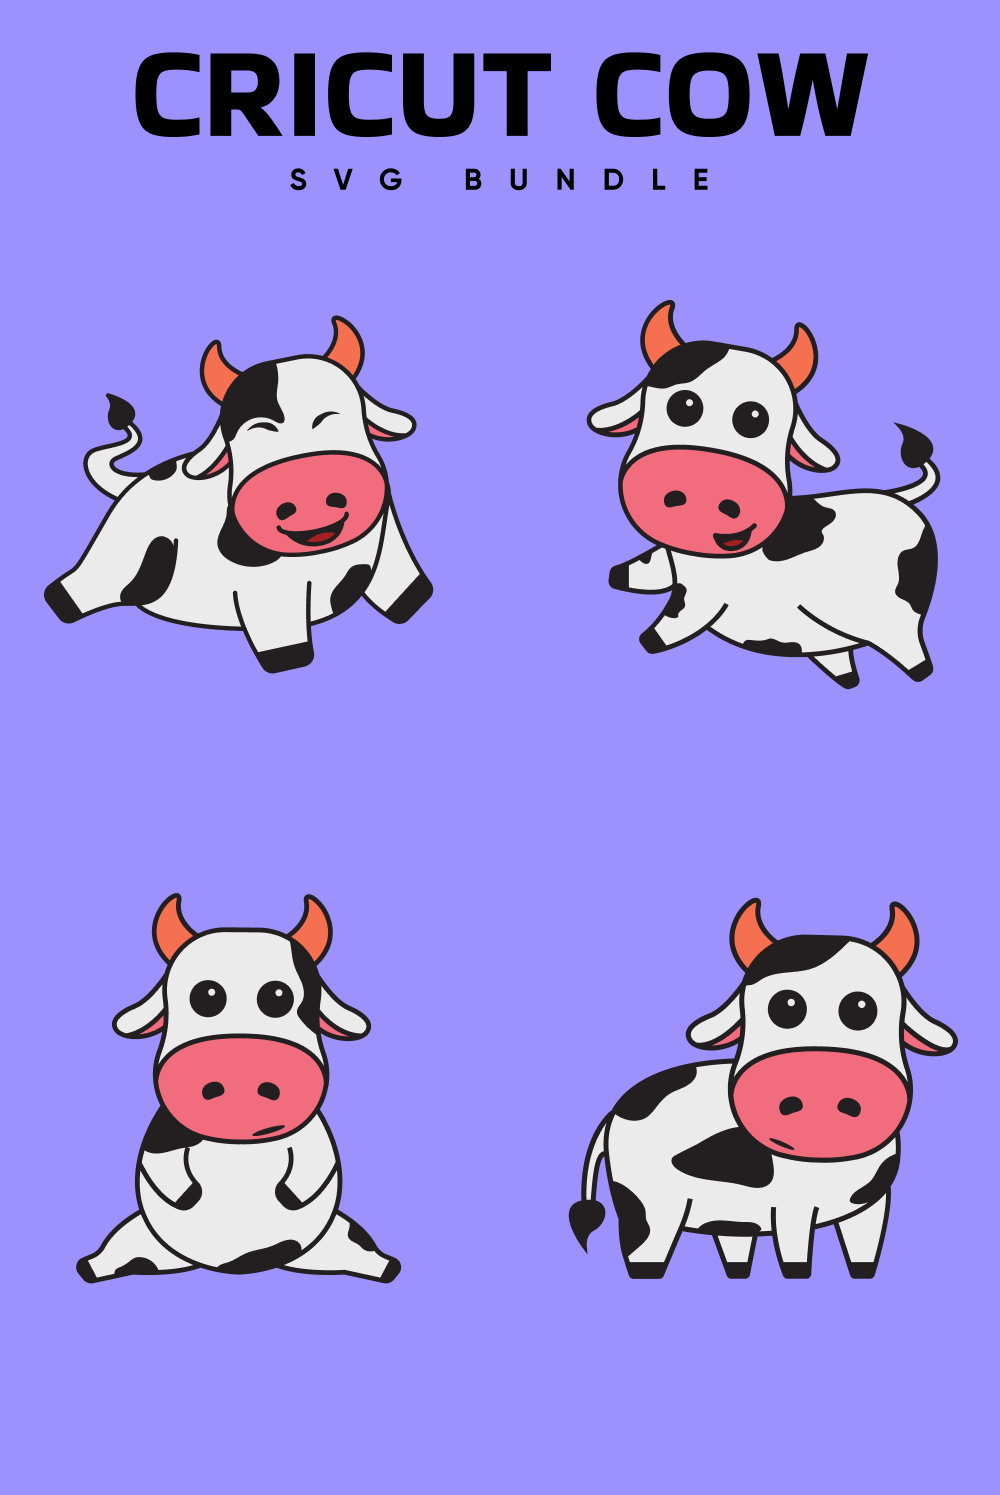 Pictures of cute cows running happily.